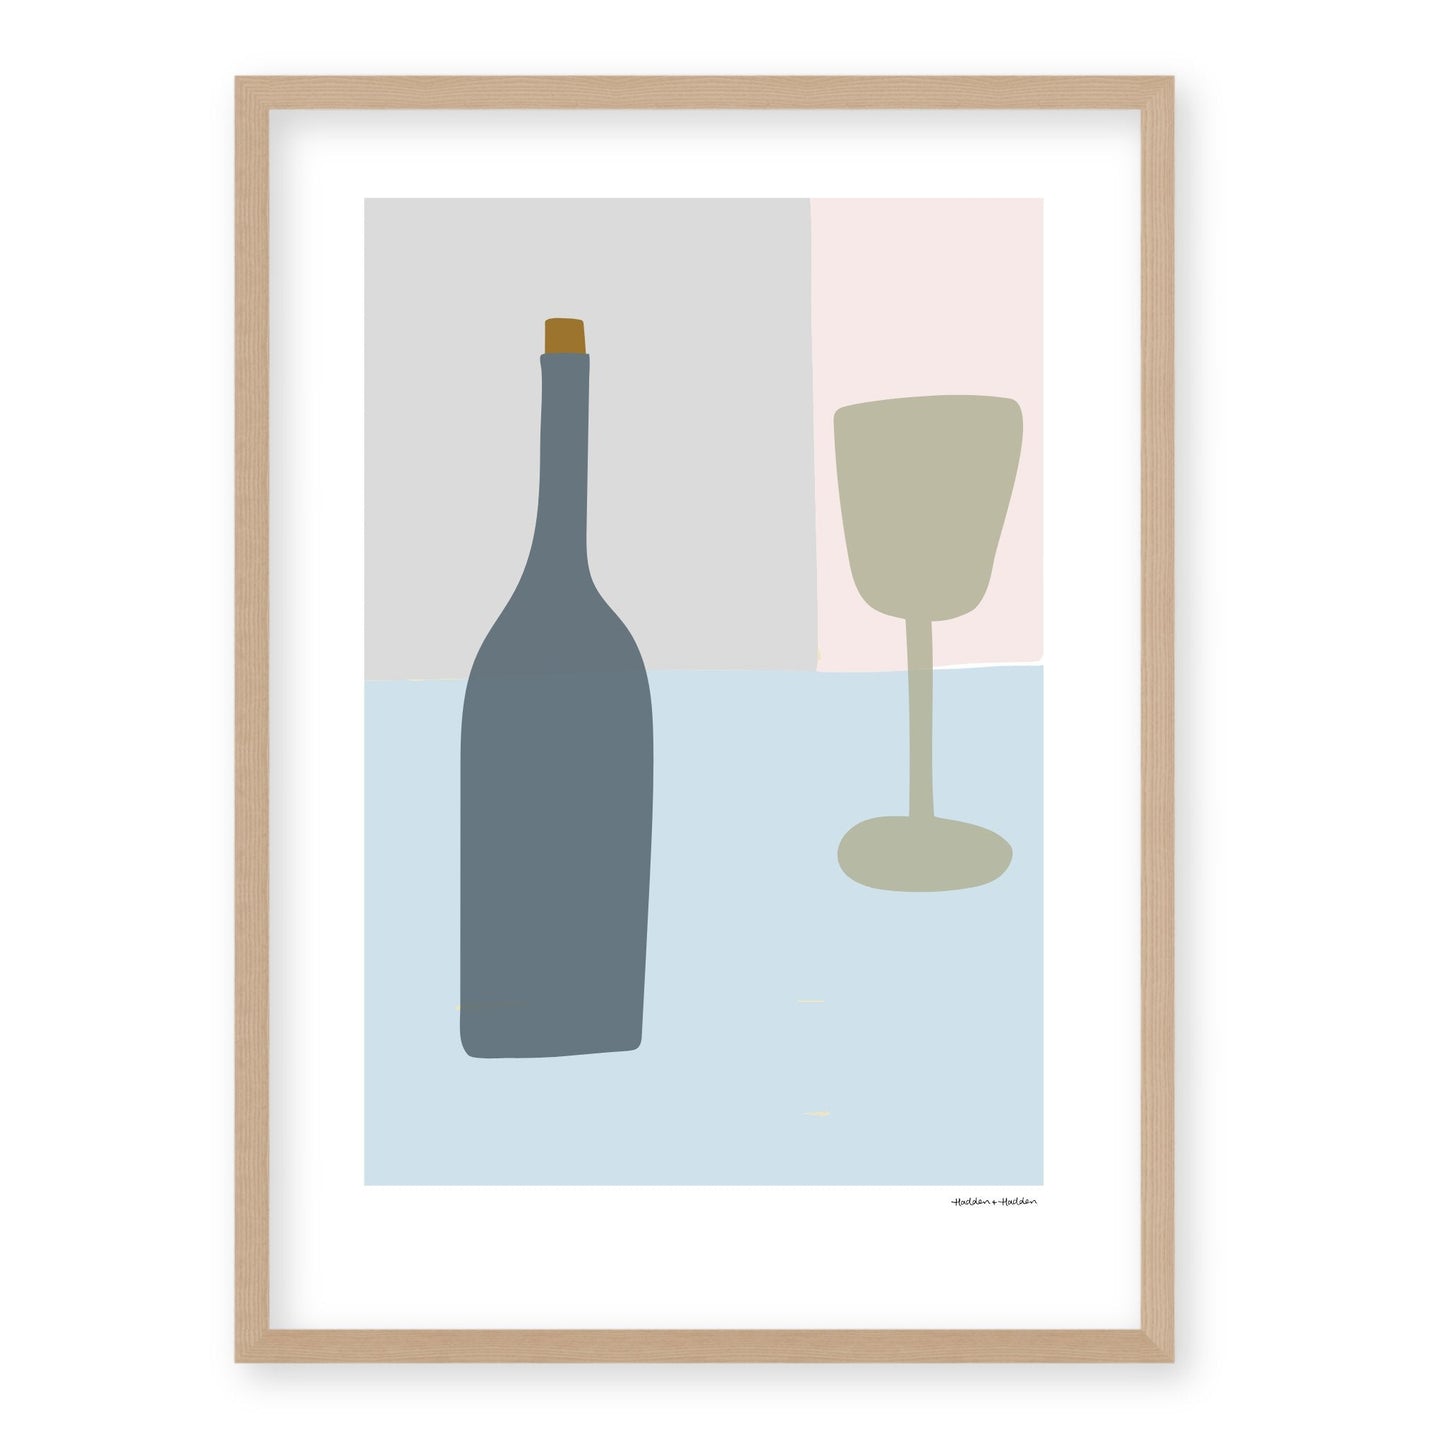 Bottle and Glass Still Life Framed Print by Hadden and Hadden